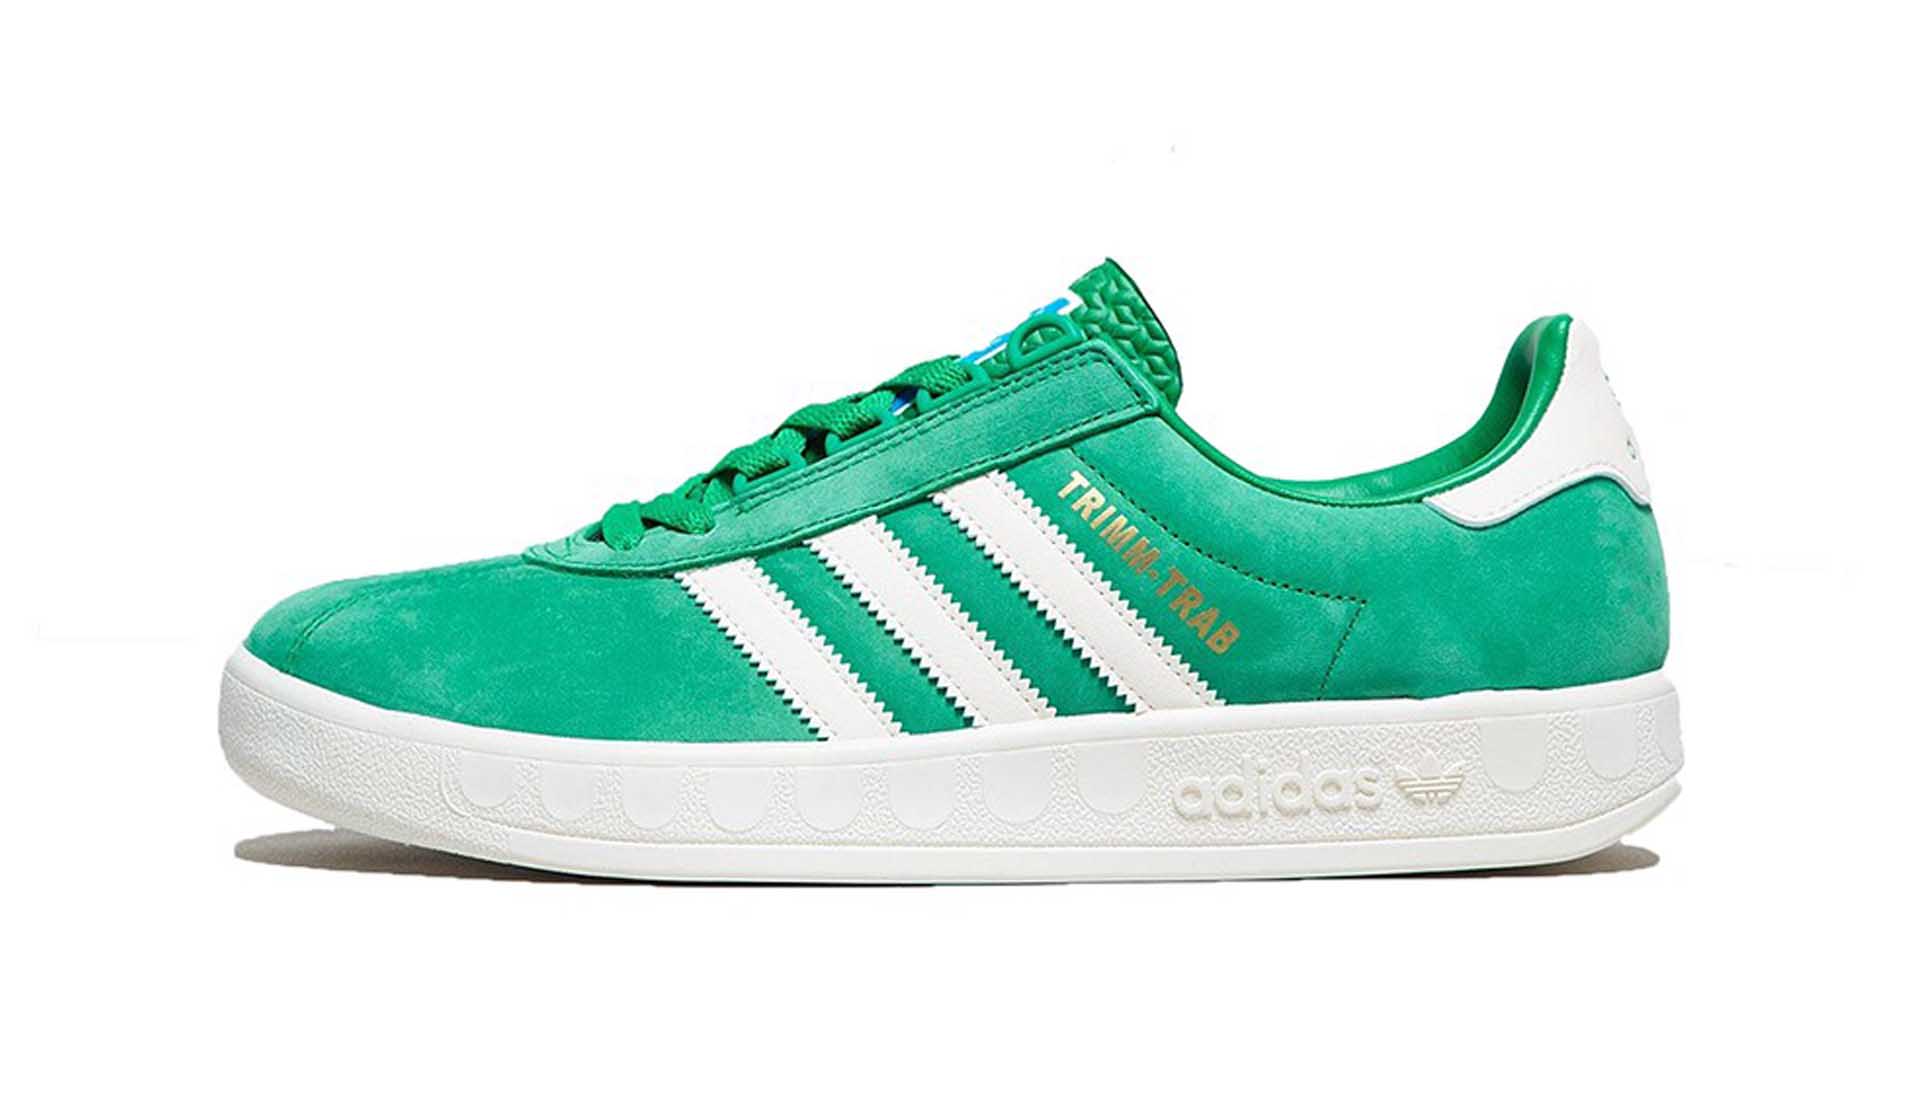 Adidas launches another Subbuteo trainer in classic green